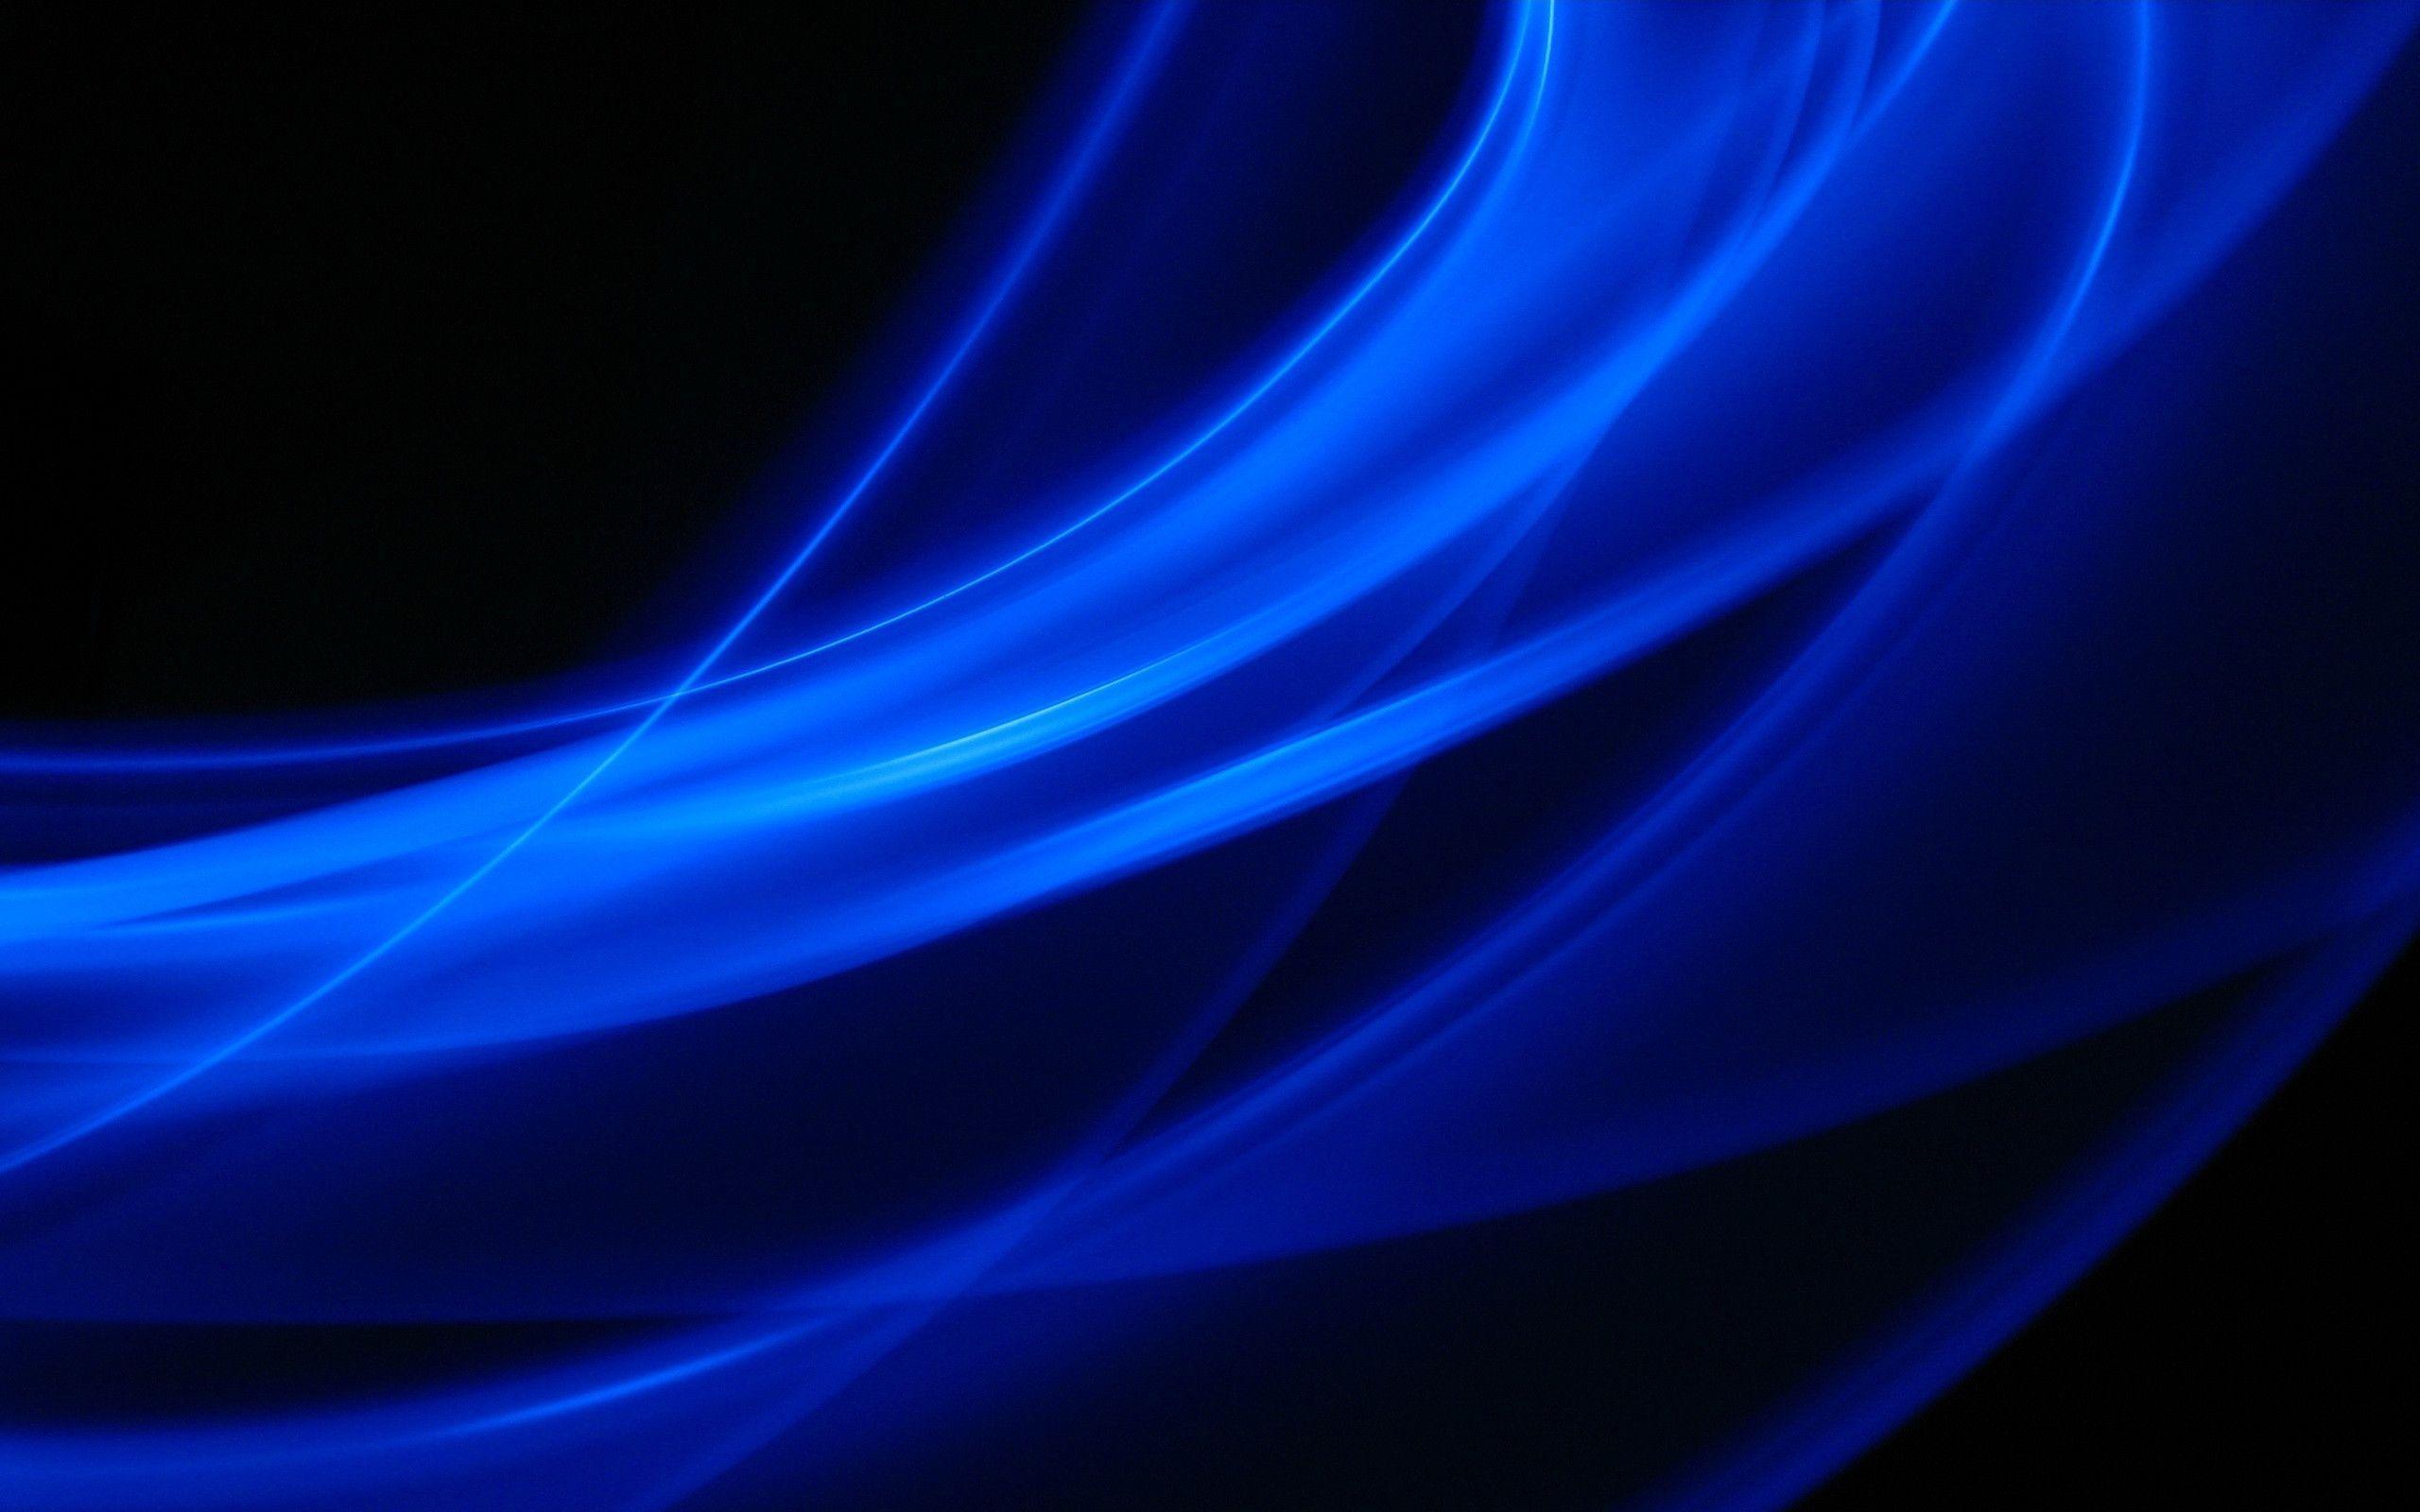 Dark Blue Abstract Wallpaper Backgrounds 1 HD Wallpapers